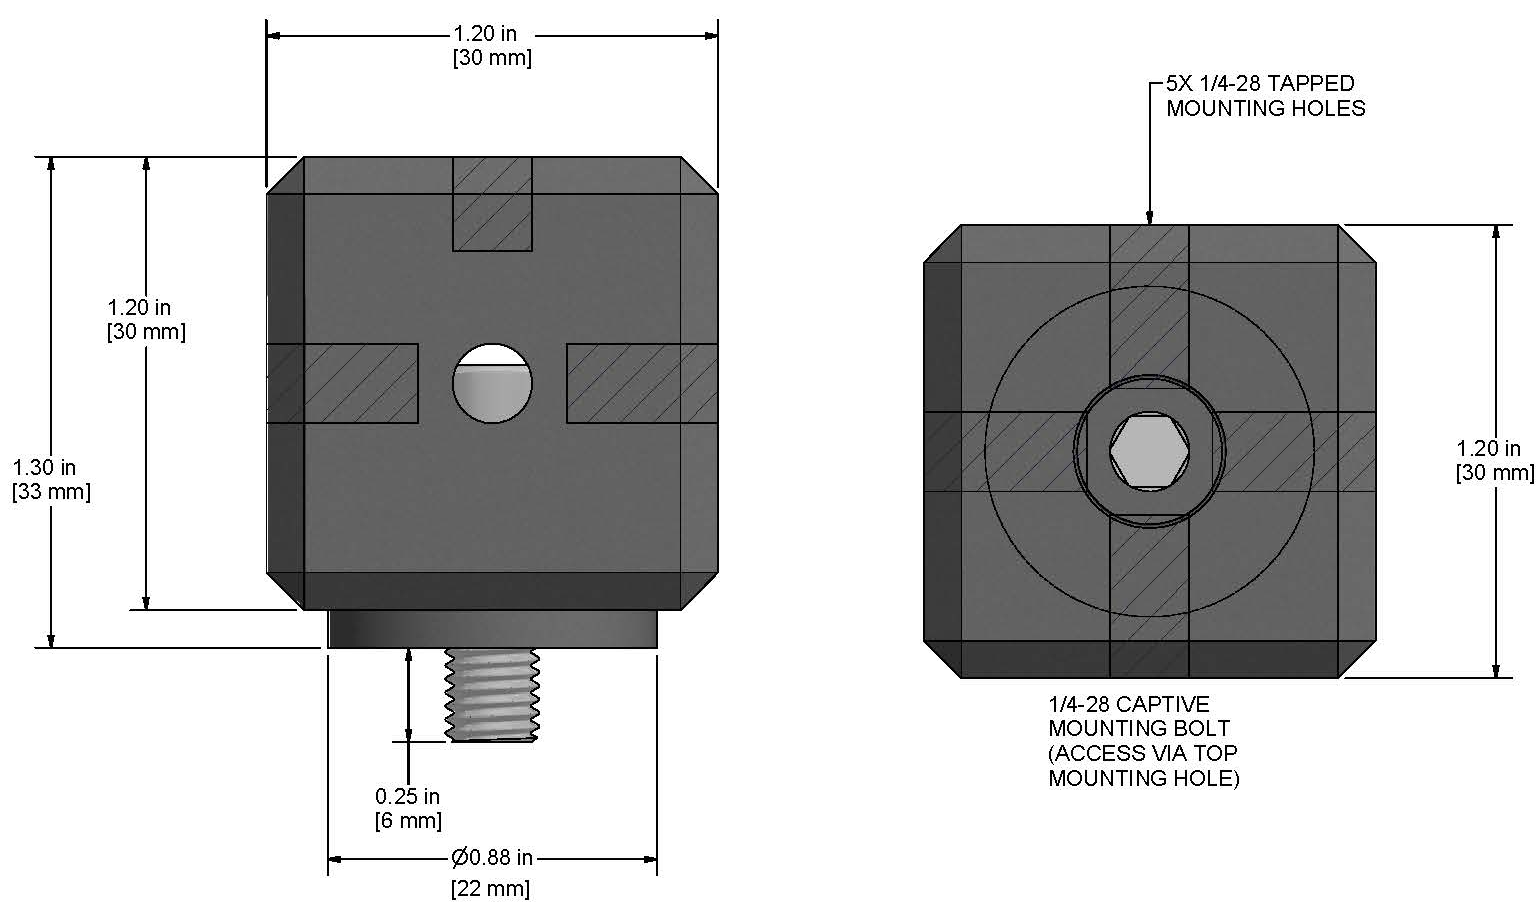 A drawing showing the dimensions of a CTC MH144-1A mounting hardware for industrial condition monitoring sensors.